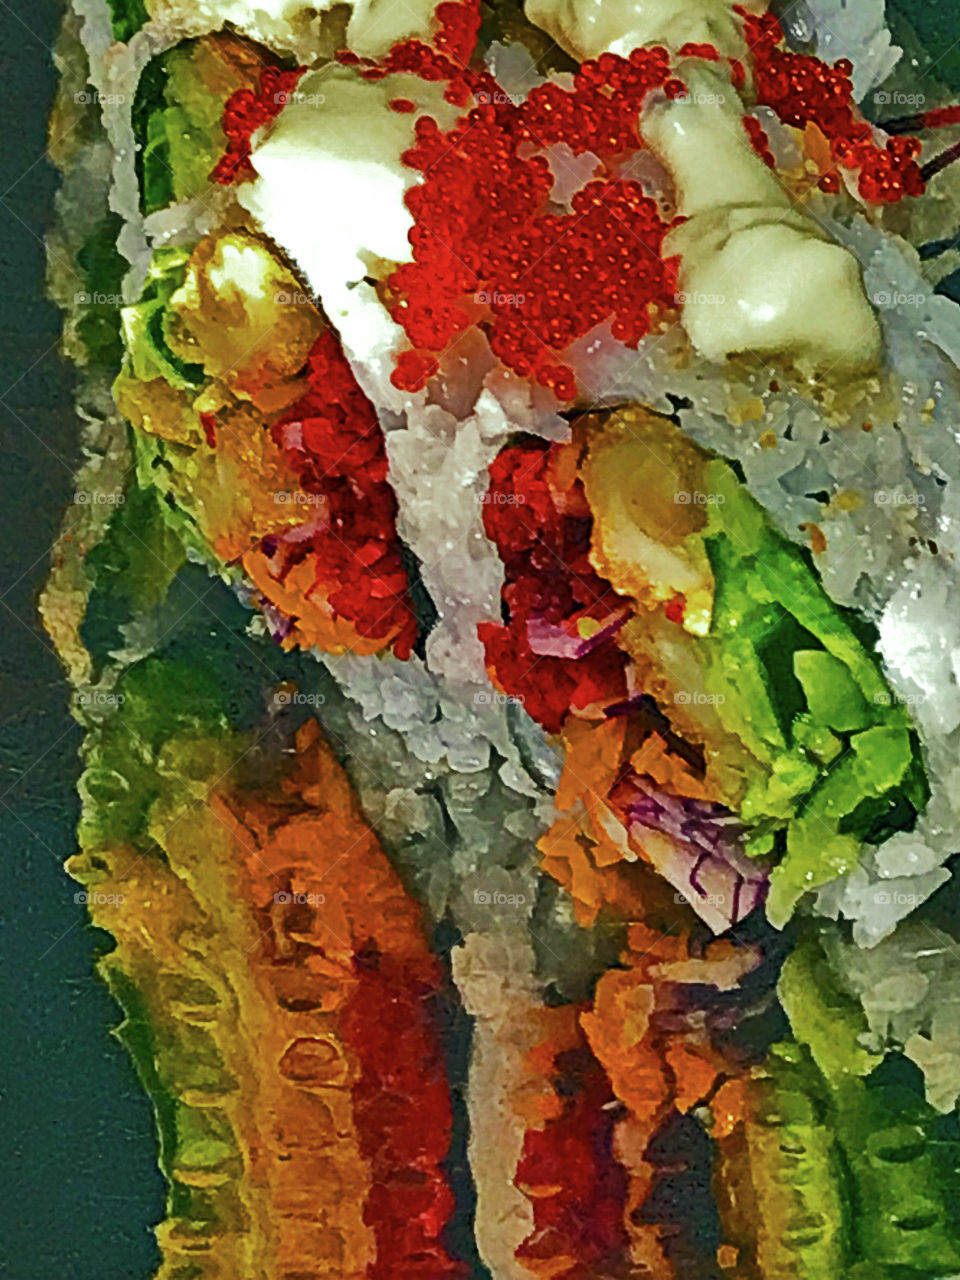 Closeup of colourful red, green, orange, yellow, white & black Calamari sushi on a reflective silver plate under a restaurant table spotlight. The bright colours and textures are only slightly blurred in the reflection producing an abstract effect. 🥢